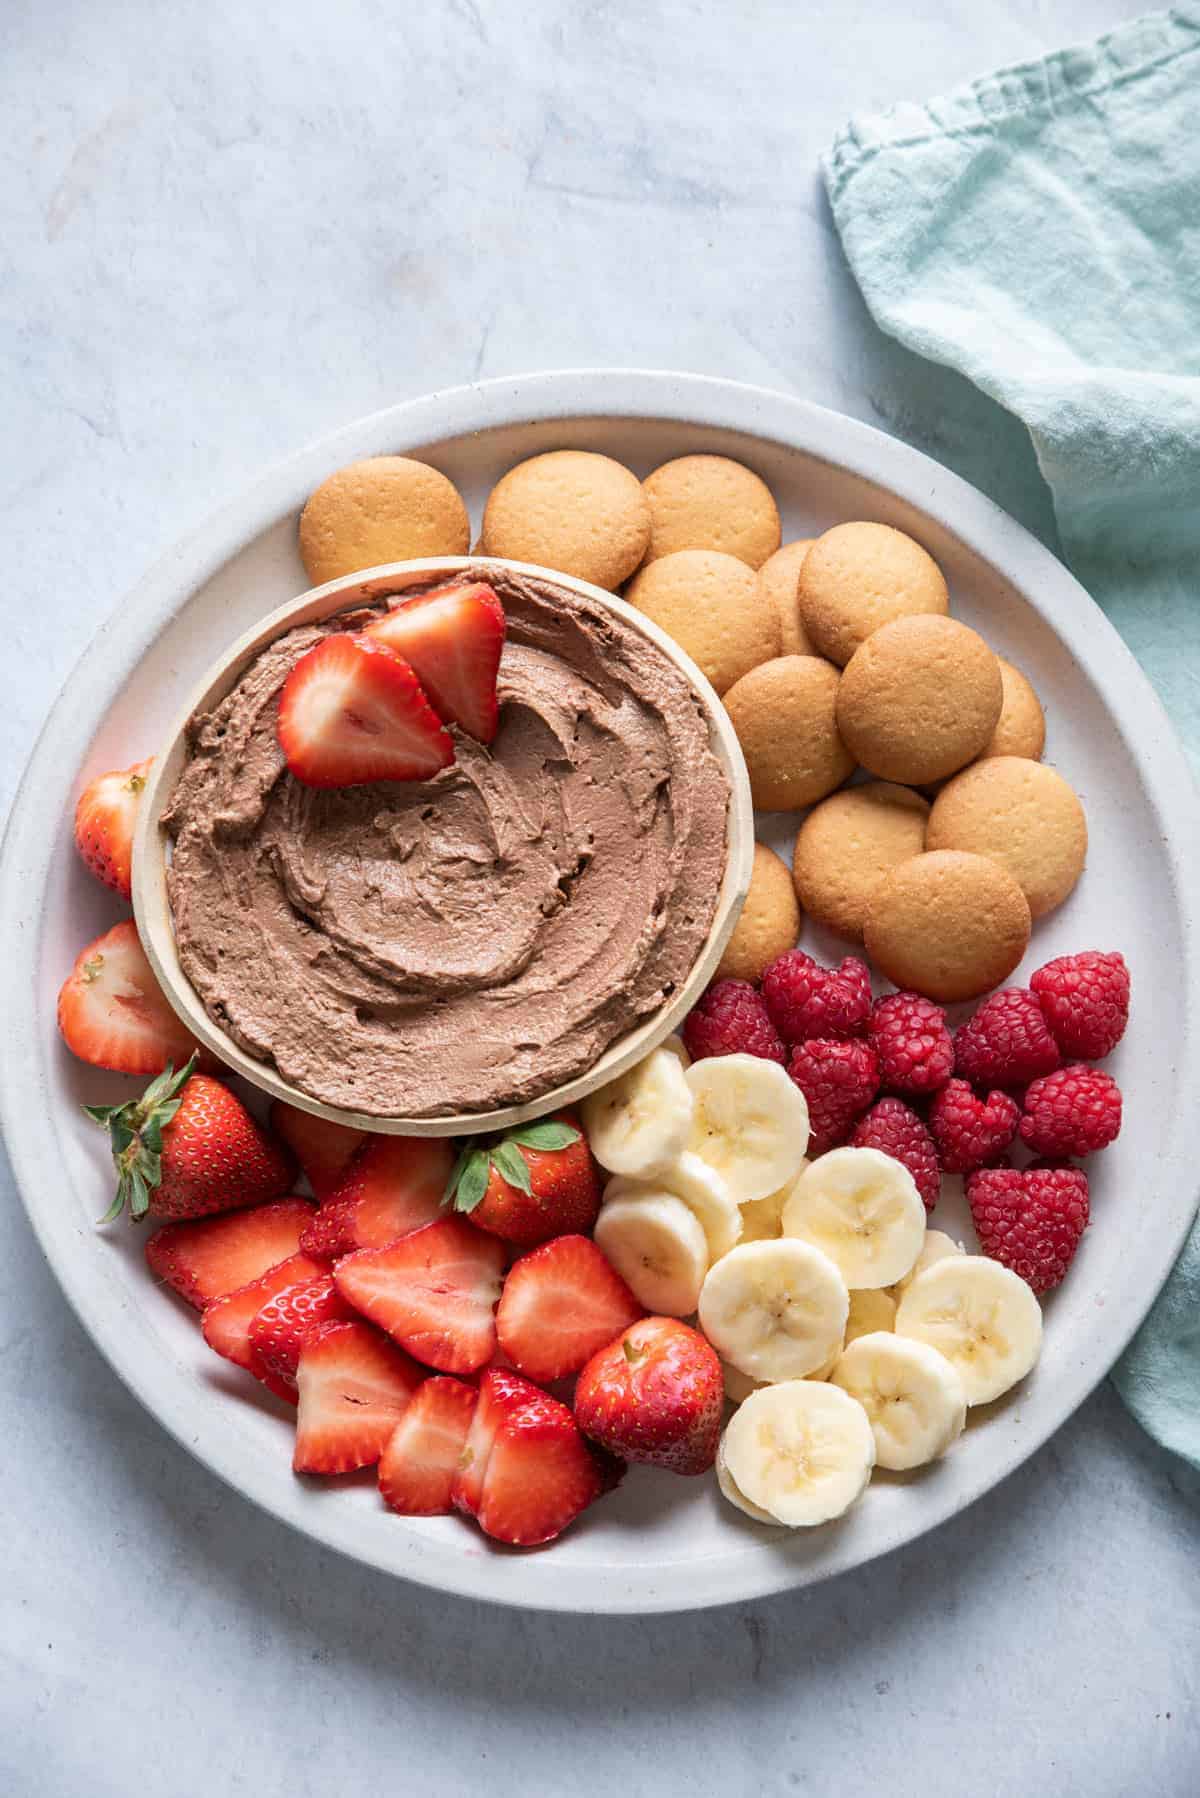 This Chocolate Peanut Butter Dip on a platter with fruit and crackers